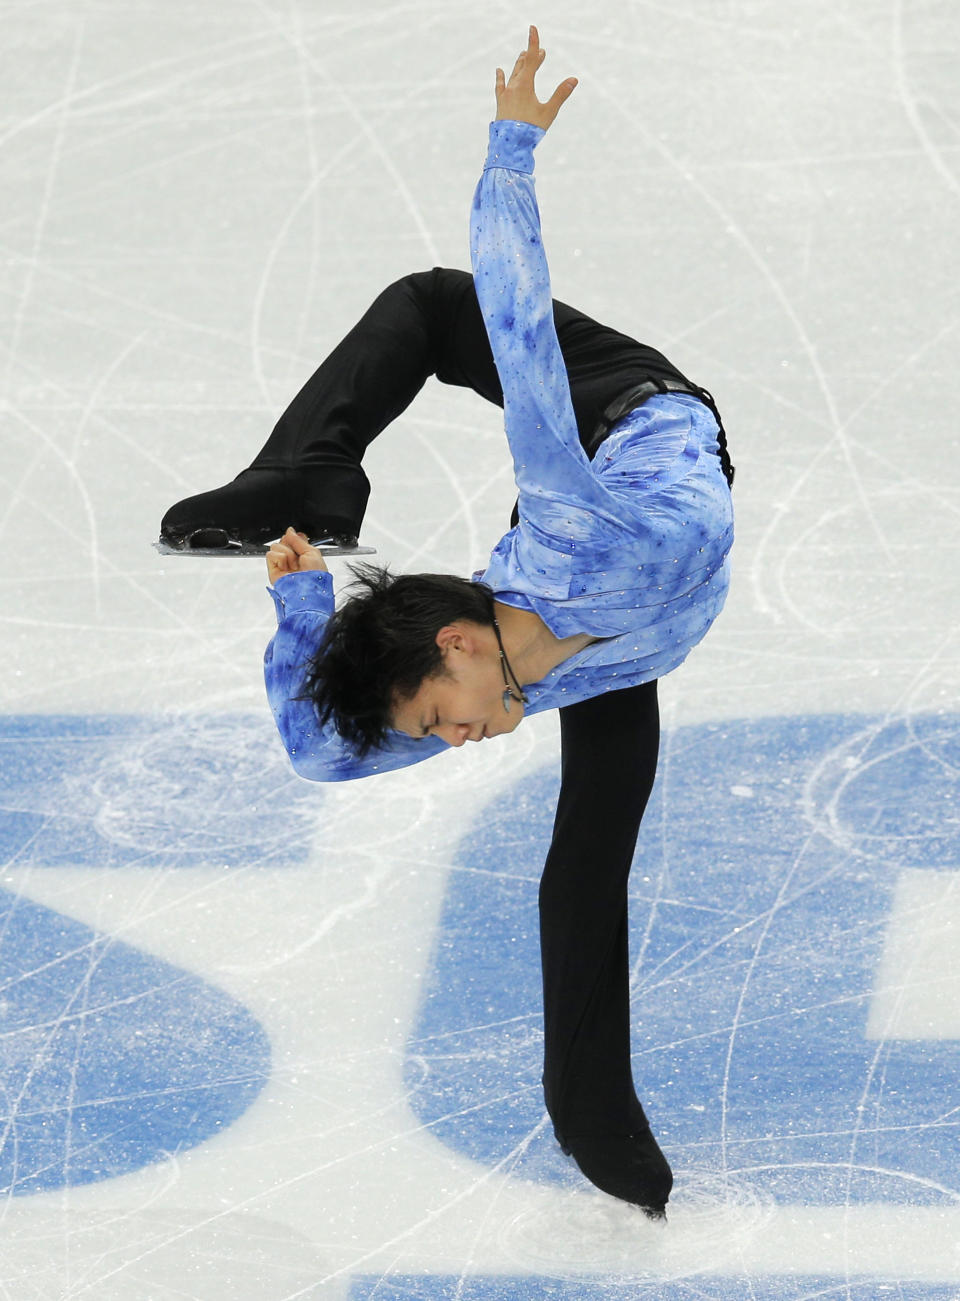 Yuzuru Hanyu of Japan competes in the men's team short program figure skating competition at the Iceberg Skating Palace during the 2014 Winter Olympics, Thursday, Feb. 6, 2014, in Sochi, Russia. (AP Photo/Vadim Ghirda)